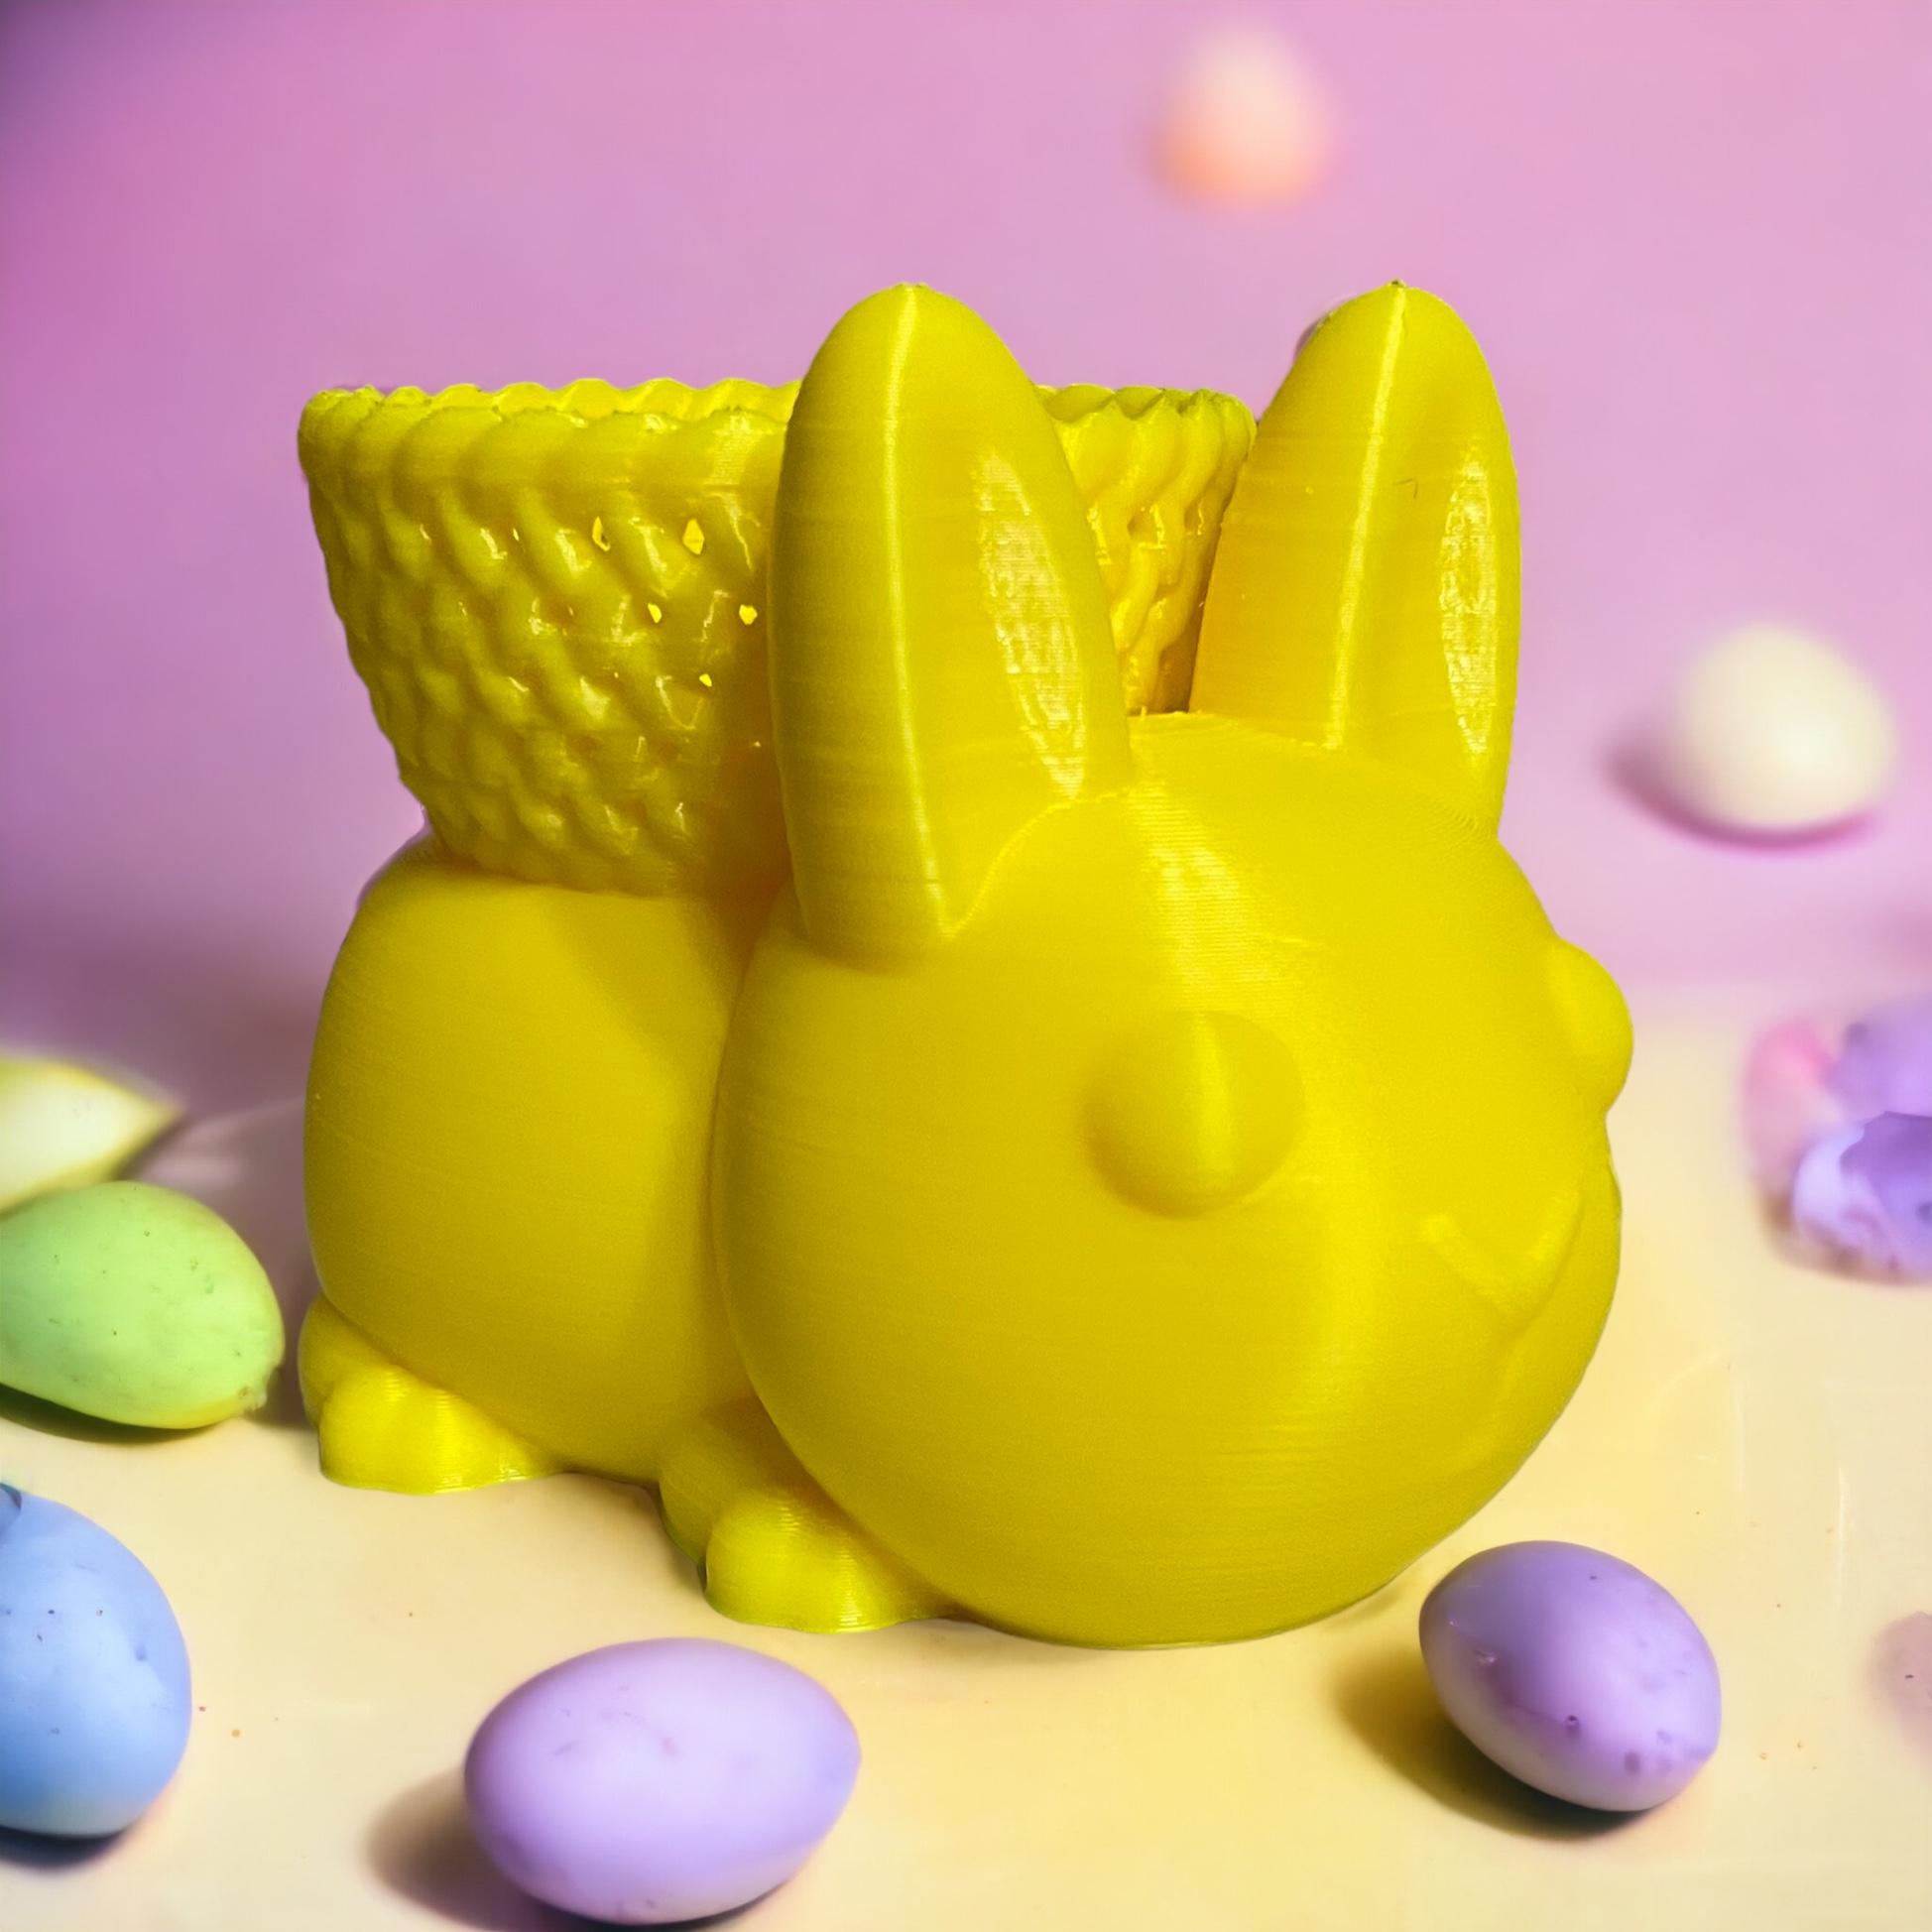 Easter Bunny with Basket - Prints very well. Ended up making 3 of them.
Thank you for sharing your file! - 3d model